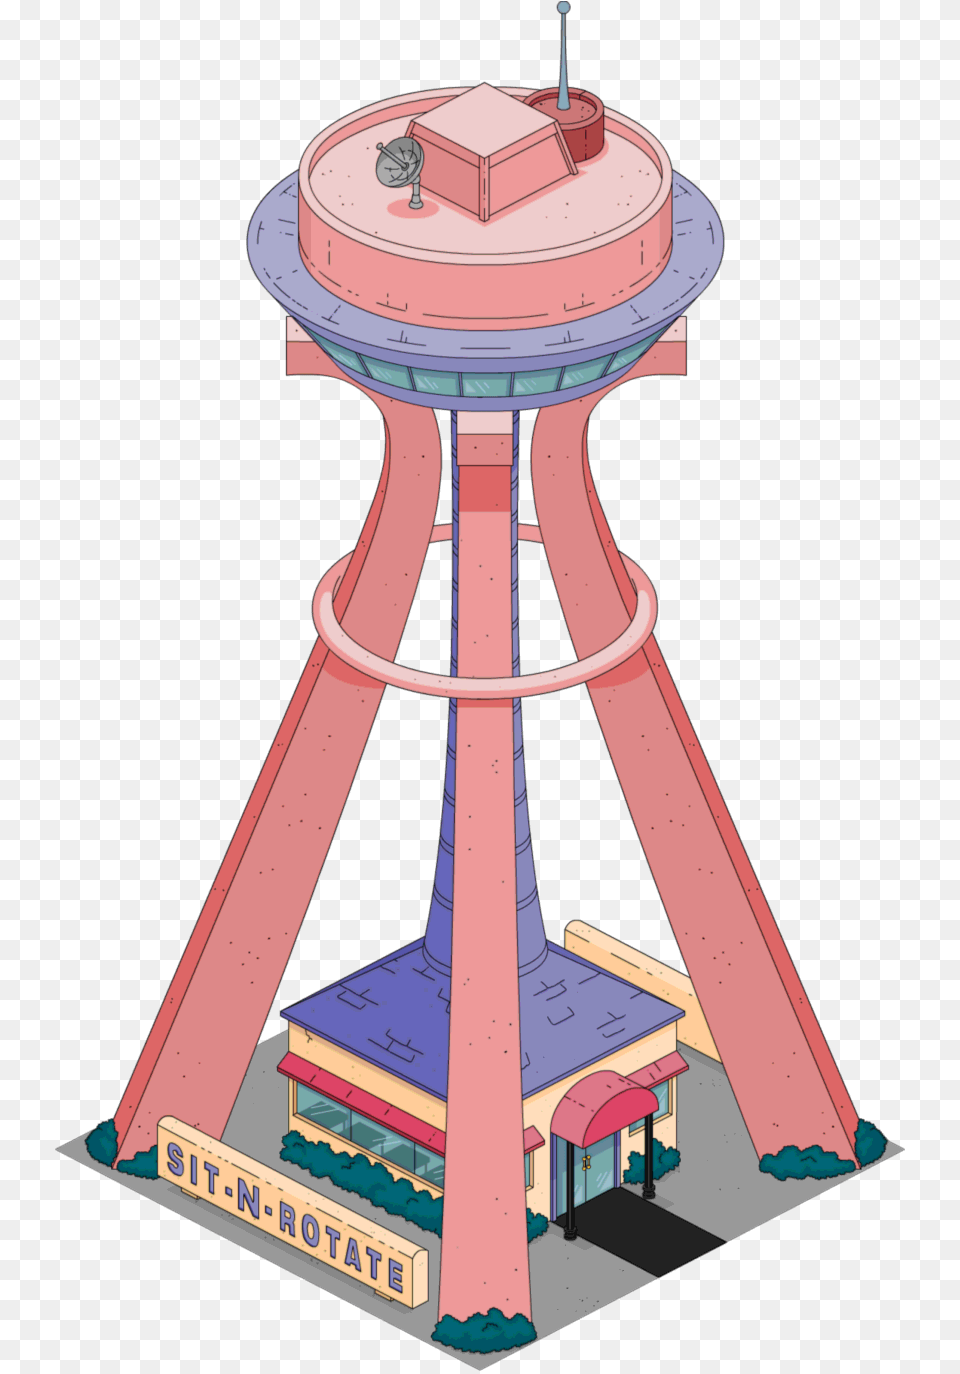 Simpsons Sit N Rotate, Architecture, Building, Tower, Water Tower Png